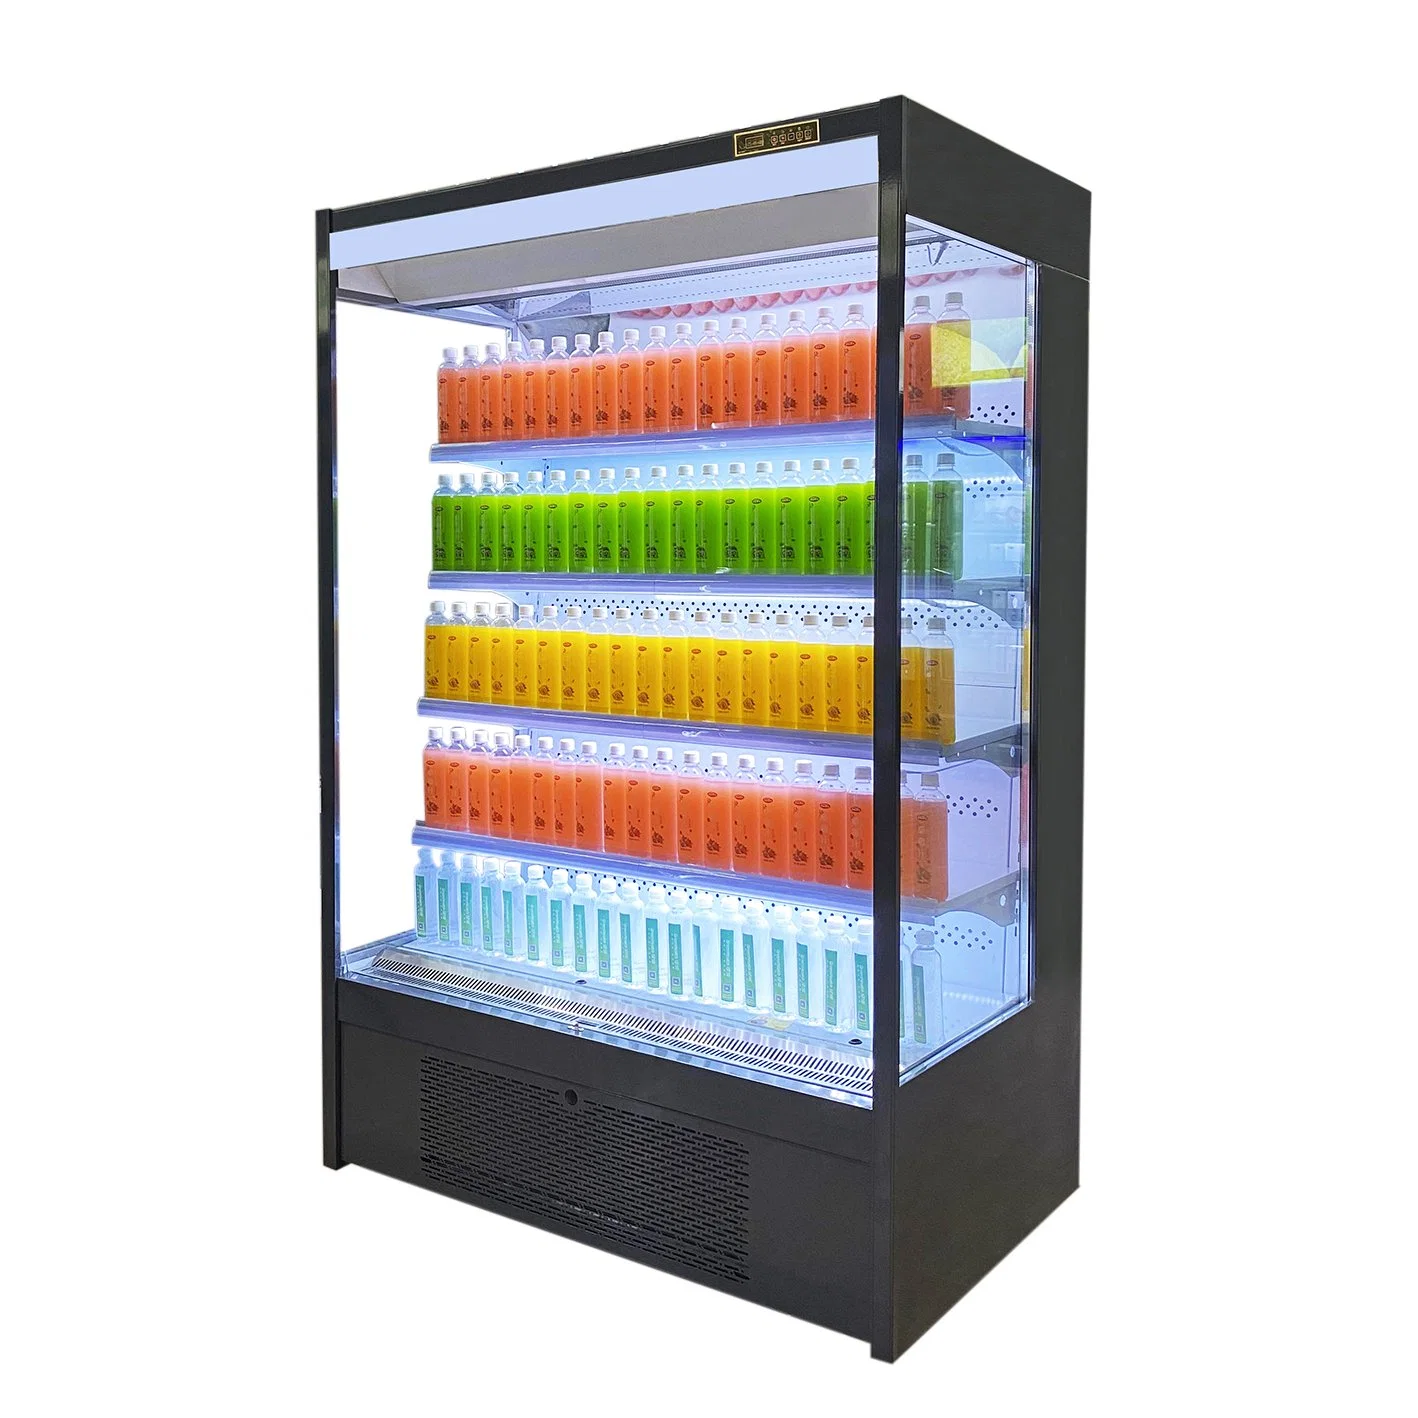 Custom Length Multi-Deck Chiller Closed Cooler Commercial Refrigerator for Supermarket and Store